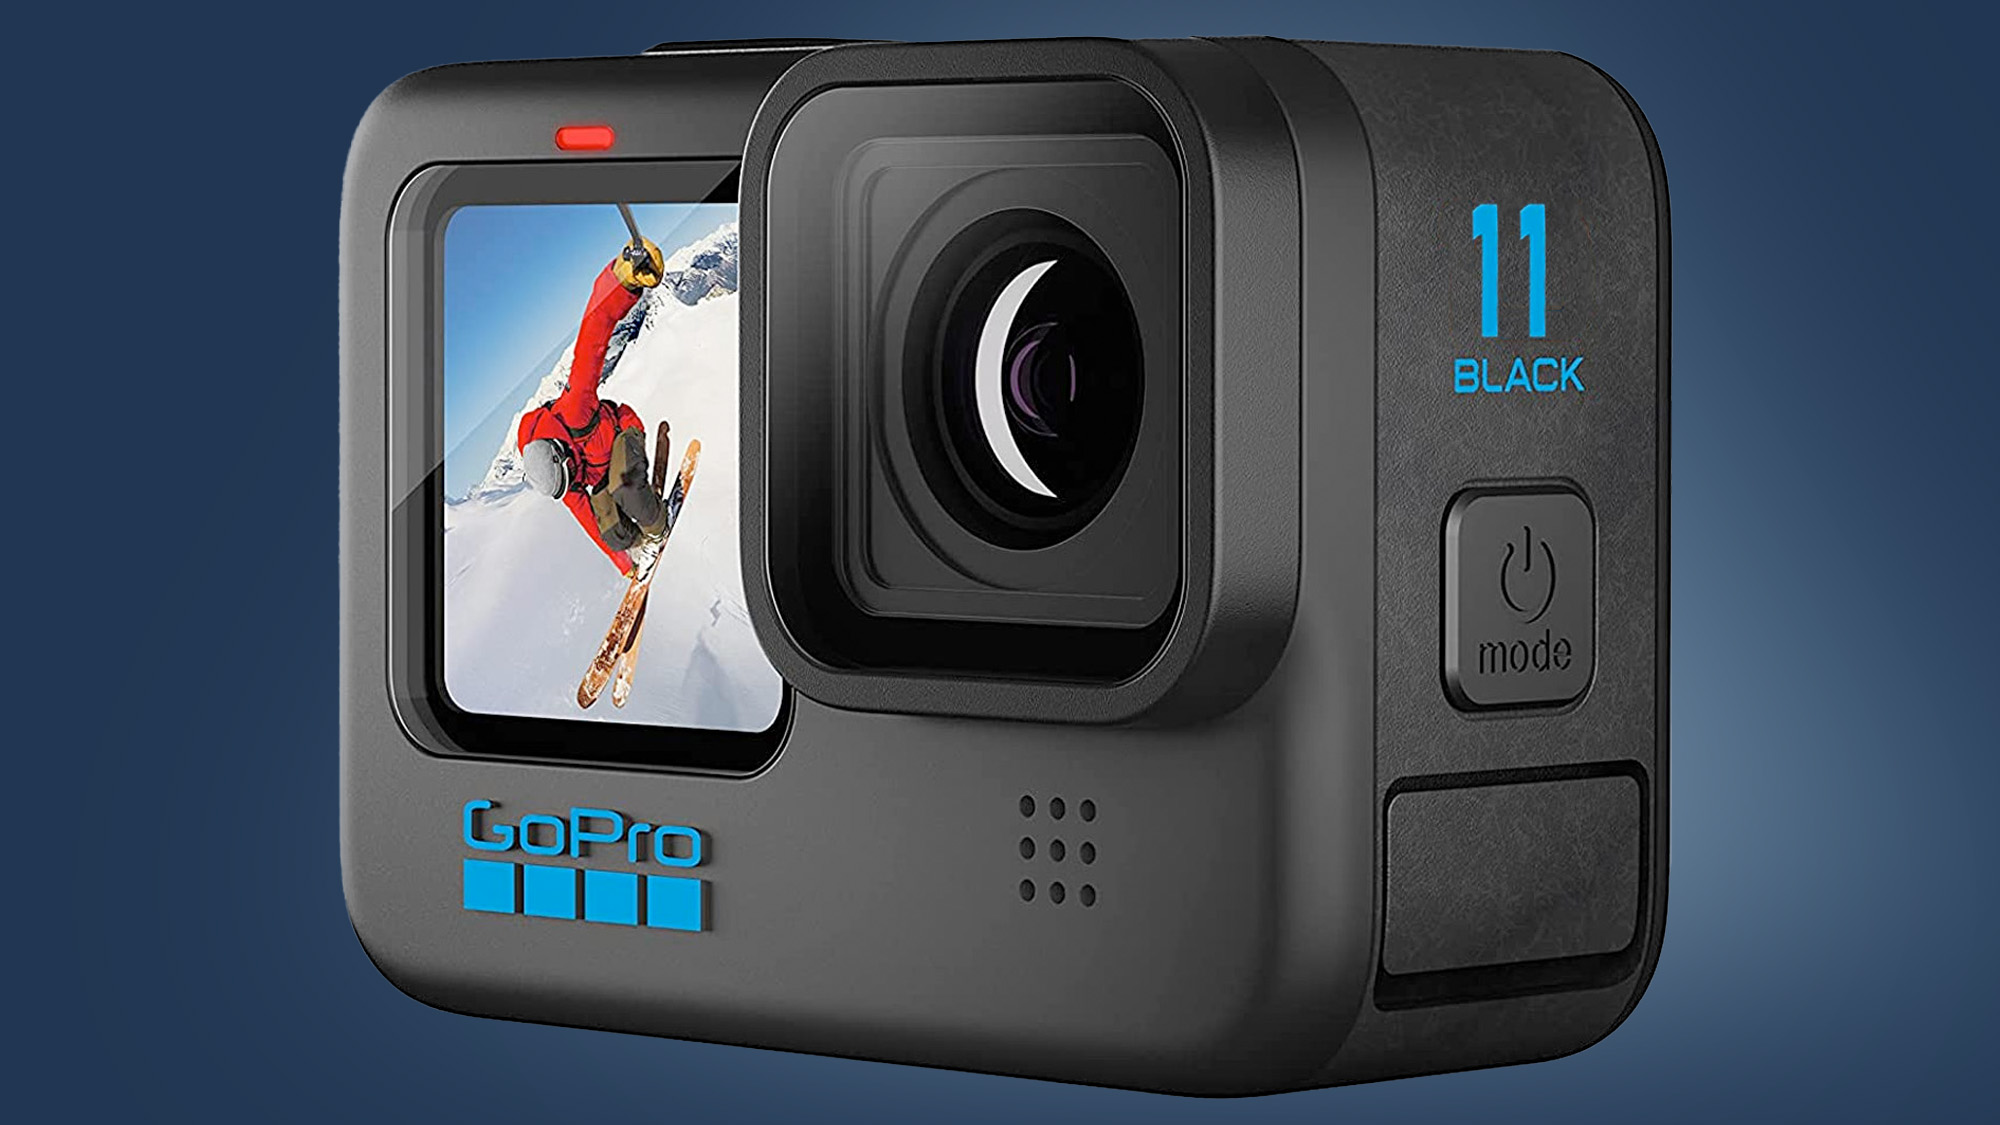 A mock up of the GoPro Hero 11 Black action camera